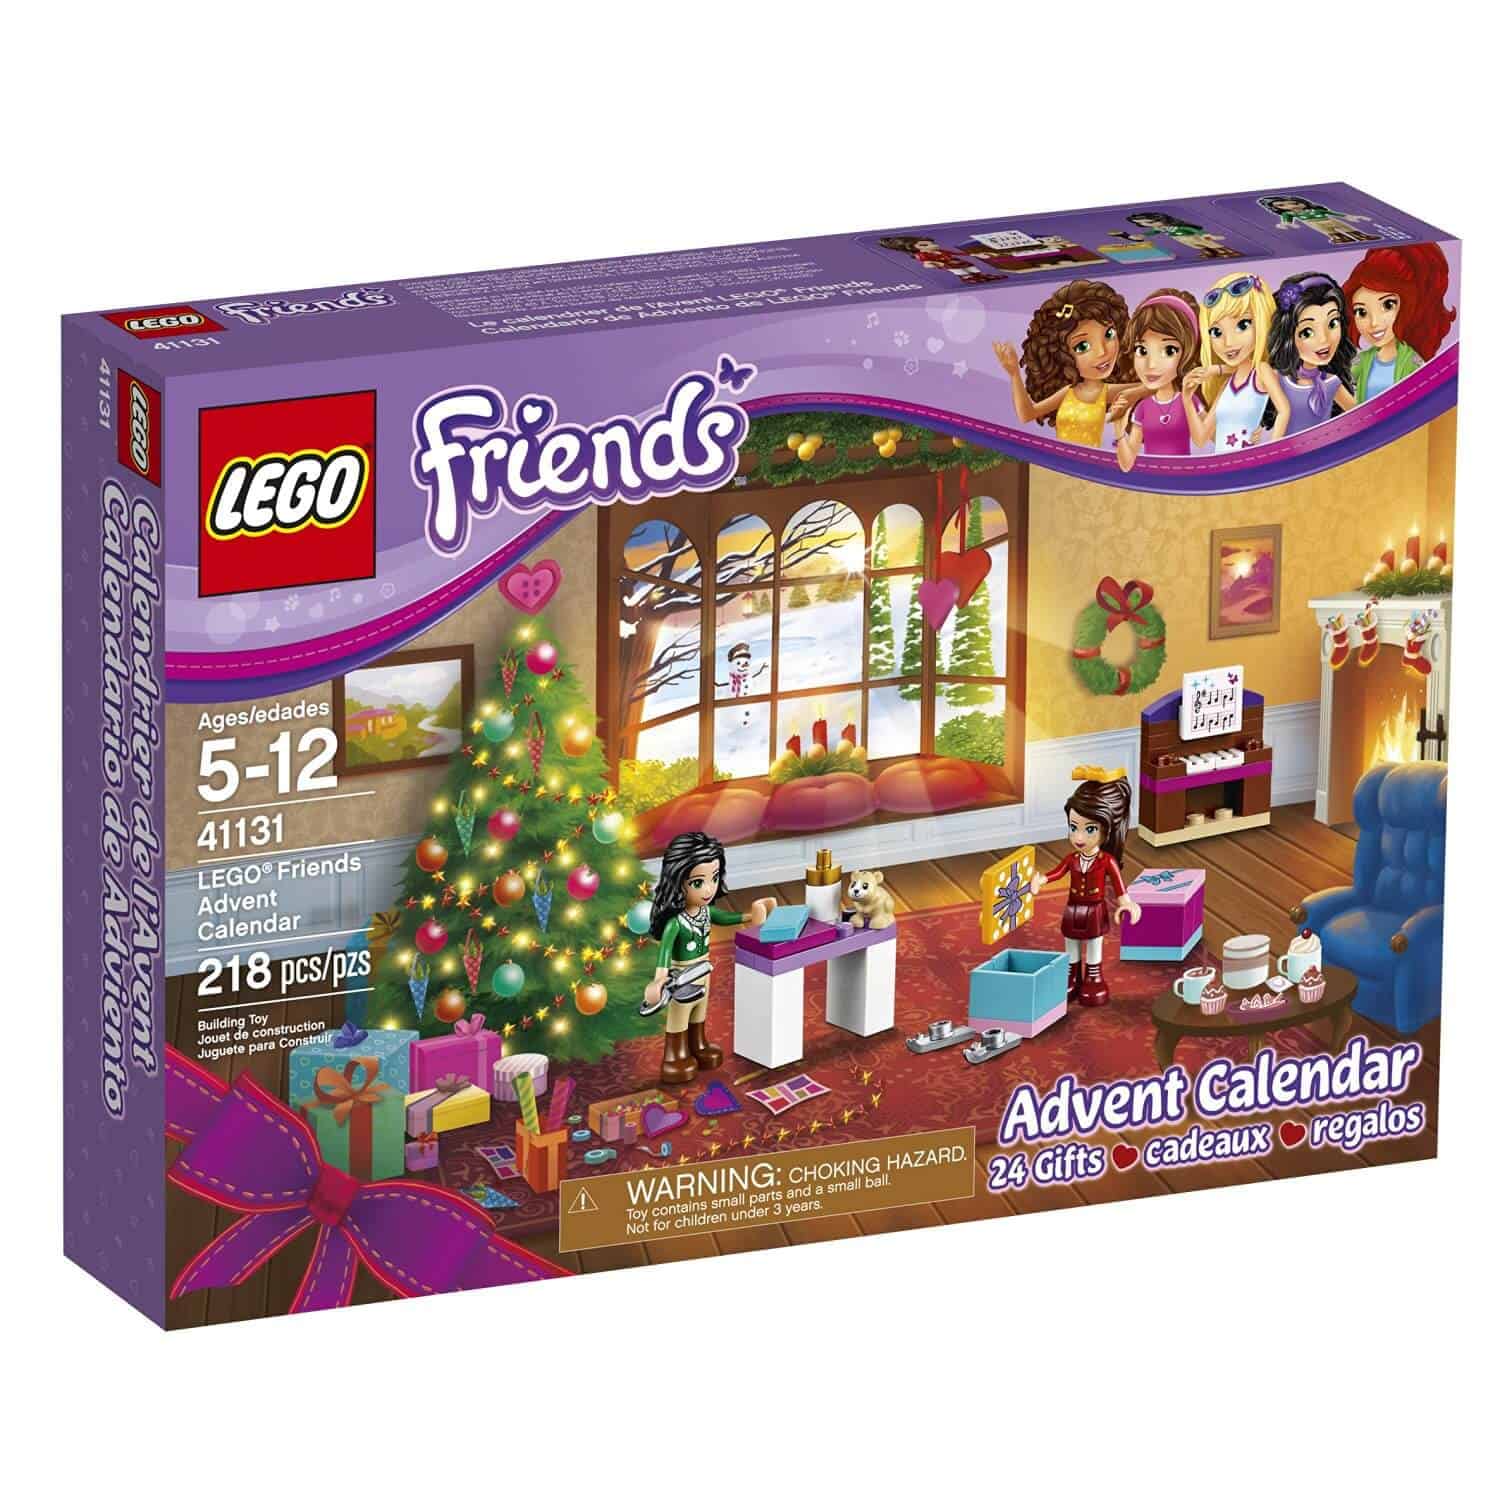 Lego Friends Advent Calendar Reviews Get All The Details At Hello